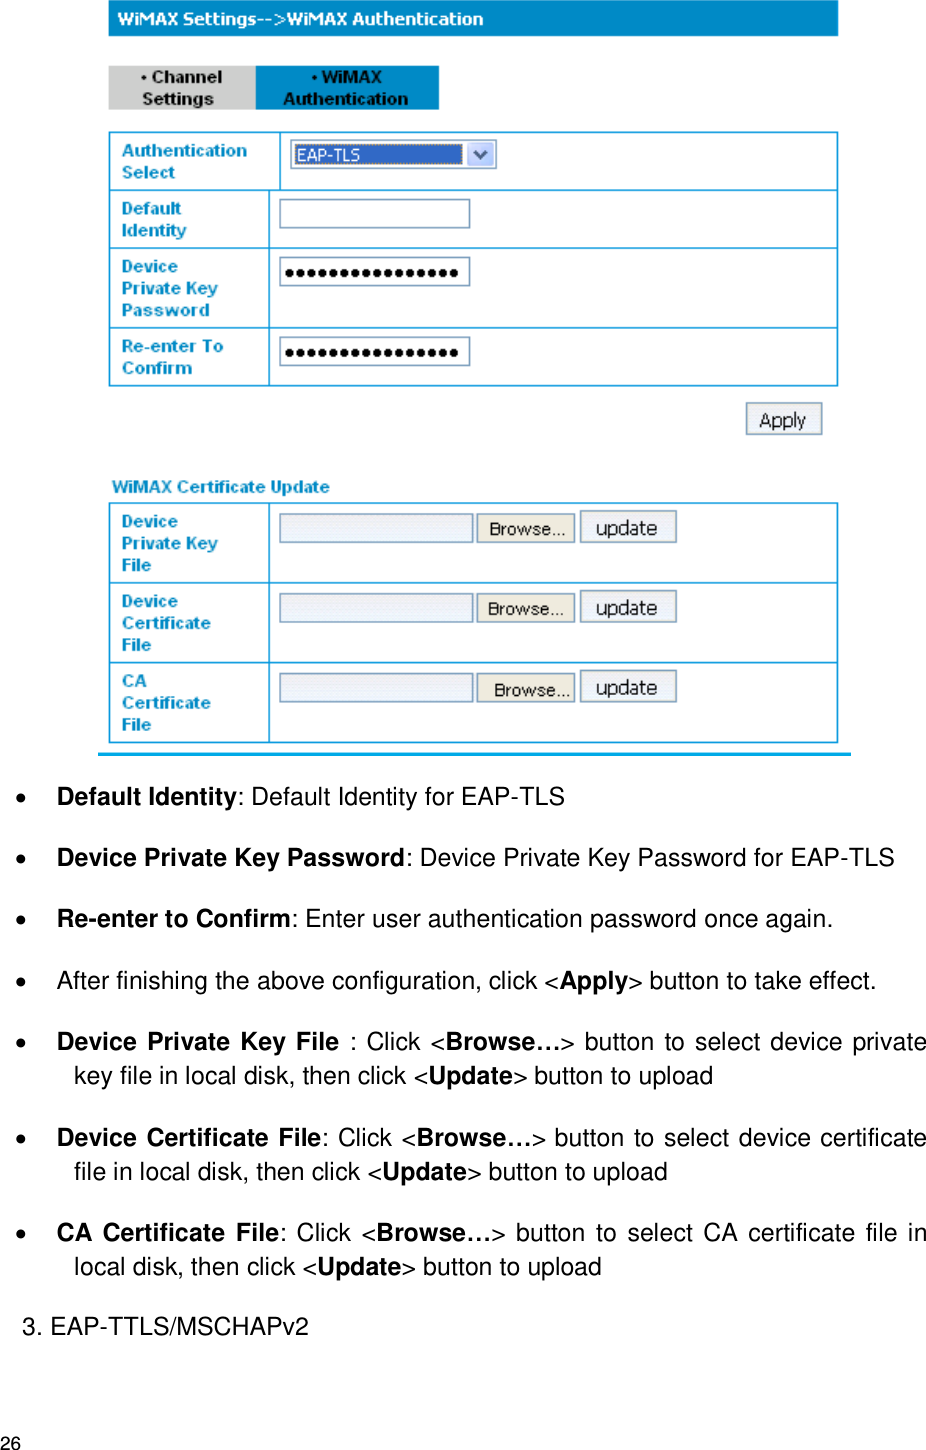 26   Default Identity: Default Identity for EAP-TLS  Device Private Key Password: Device Private Key Password for EAP-TLS  Re-enter to Confirm: Enter user authentication password once again.   After finishing the above configuration, click &lt;Apply&gt; button to take effect.  Device Private Key File : Click &lt;Browse…&gt; button to select device private key file in local disk, then click &lt;Update&gt; button to upload    Device Certificate File: Click &lt;Browse…&gt; button to select device certificate file in local disk, then click &lt;Update&gt; button to upload    CA Certificate File: Click &lt;Browse…&gt; button to  select CA certificate file in local disk, then click &lt;Update&gt; button to upload   3. EAP-TTLS/MSCHAPv2 